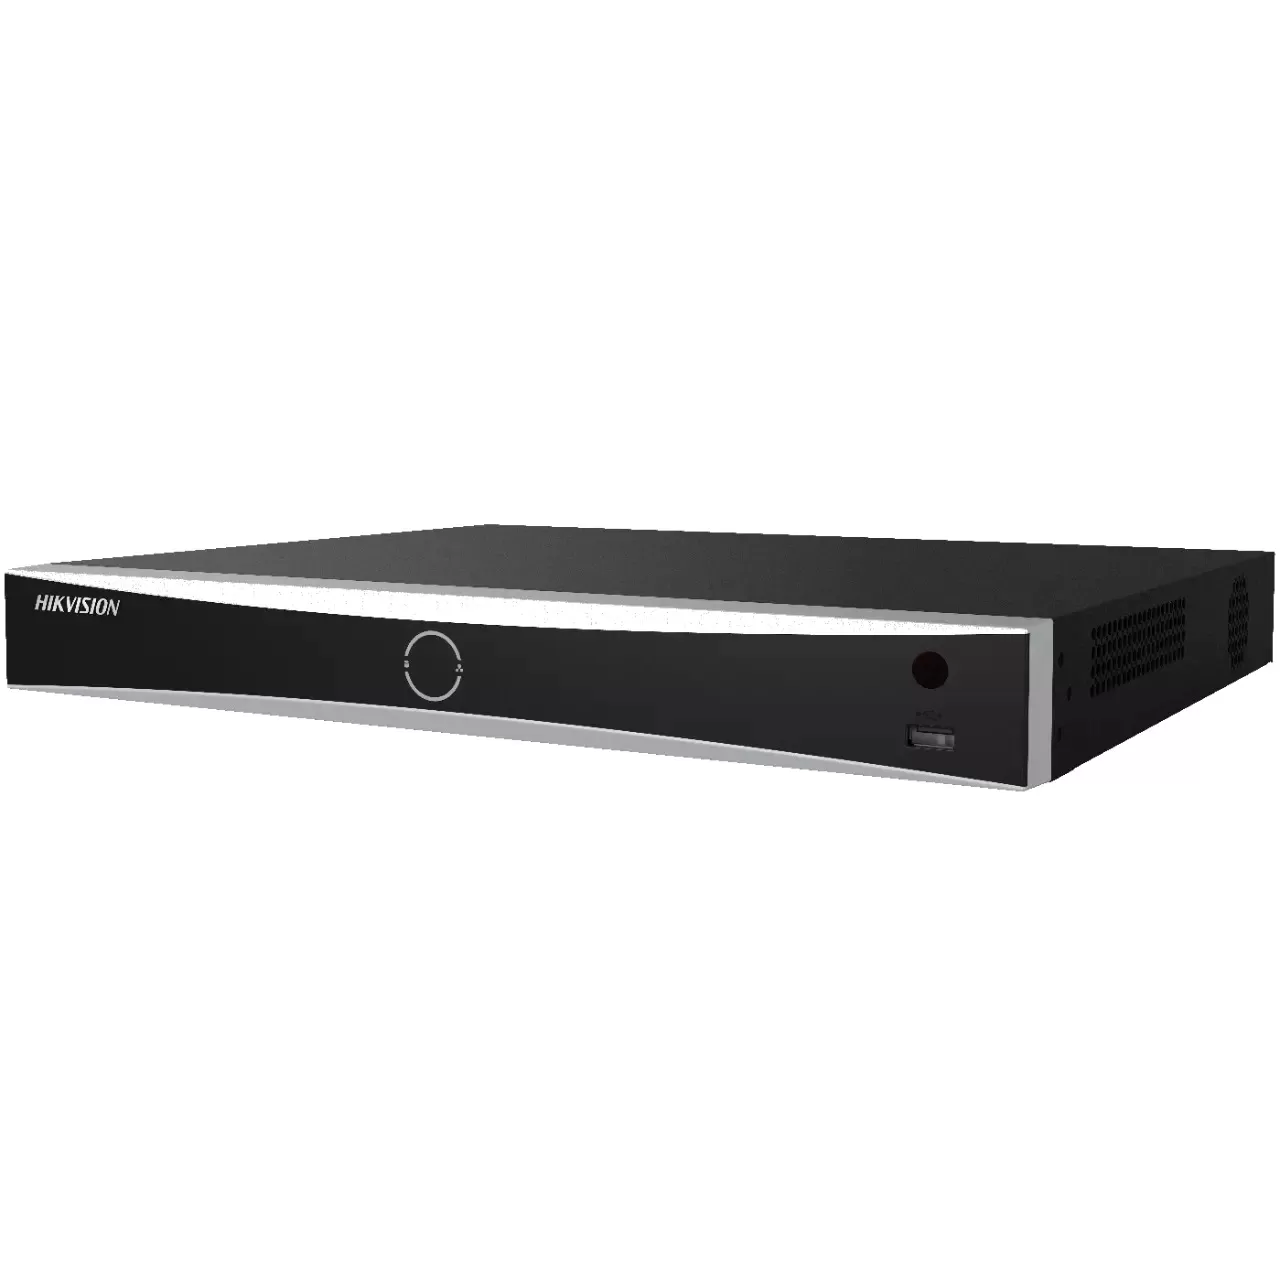 Nvr hikvision ds-7632nxi-k2 32 canale